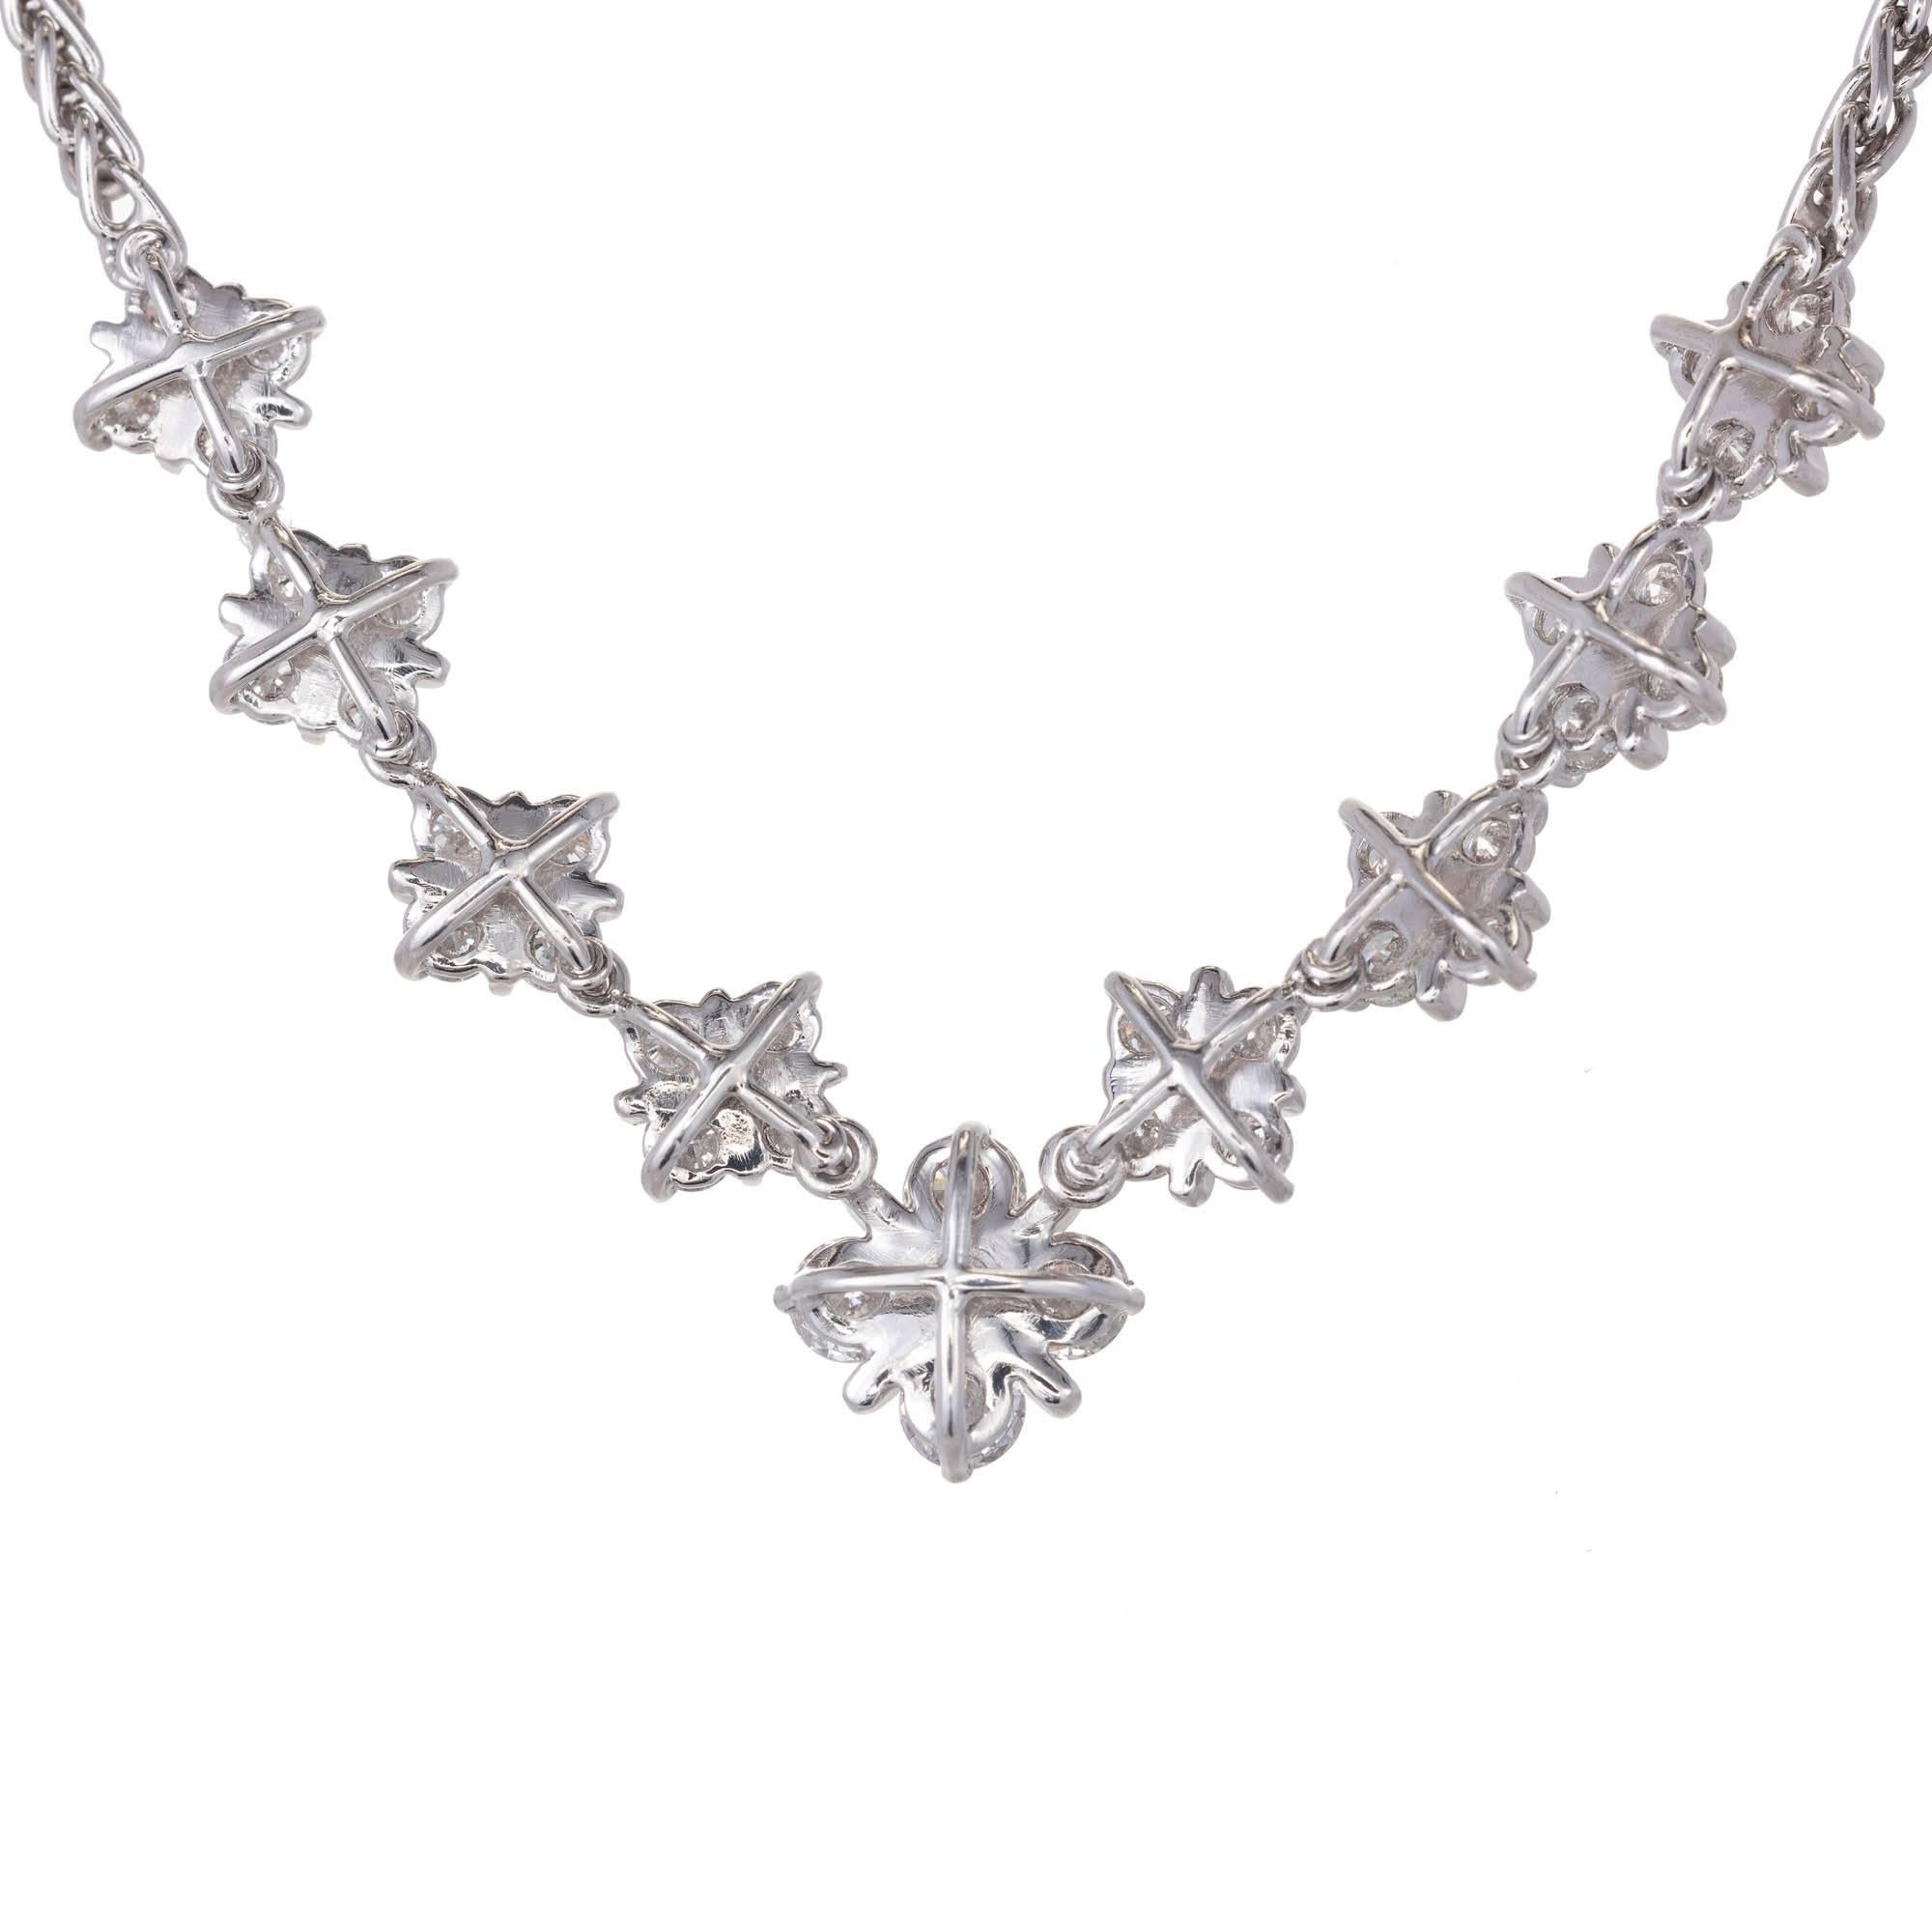 Platinum Diamond graduated checkerboard design necklace with full cut Diamonds in Platinum wire settings on a Platinum wheat chain. 16 inches

36 round full cut Diamonds, approx. total weight 1.60cts, F – G, VS
950 Platinum
20.8 grams
Tested: 950